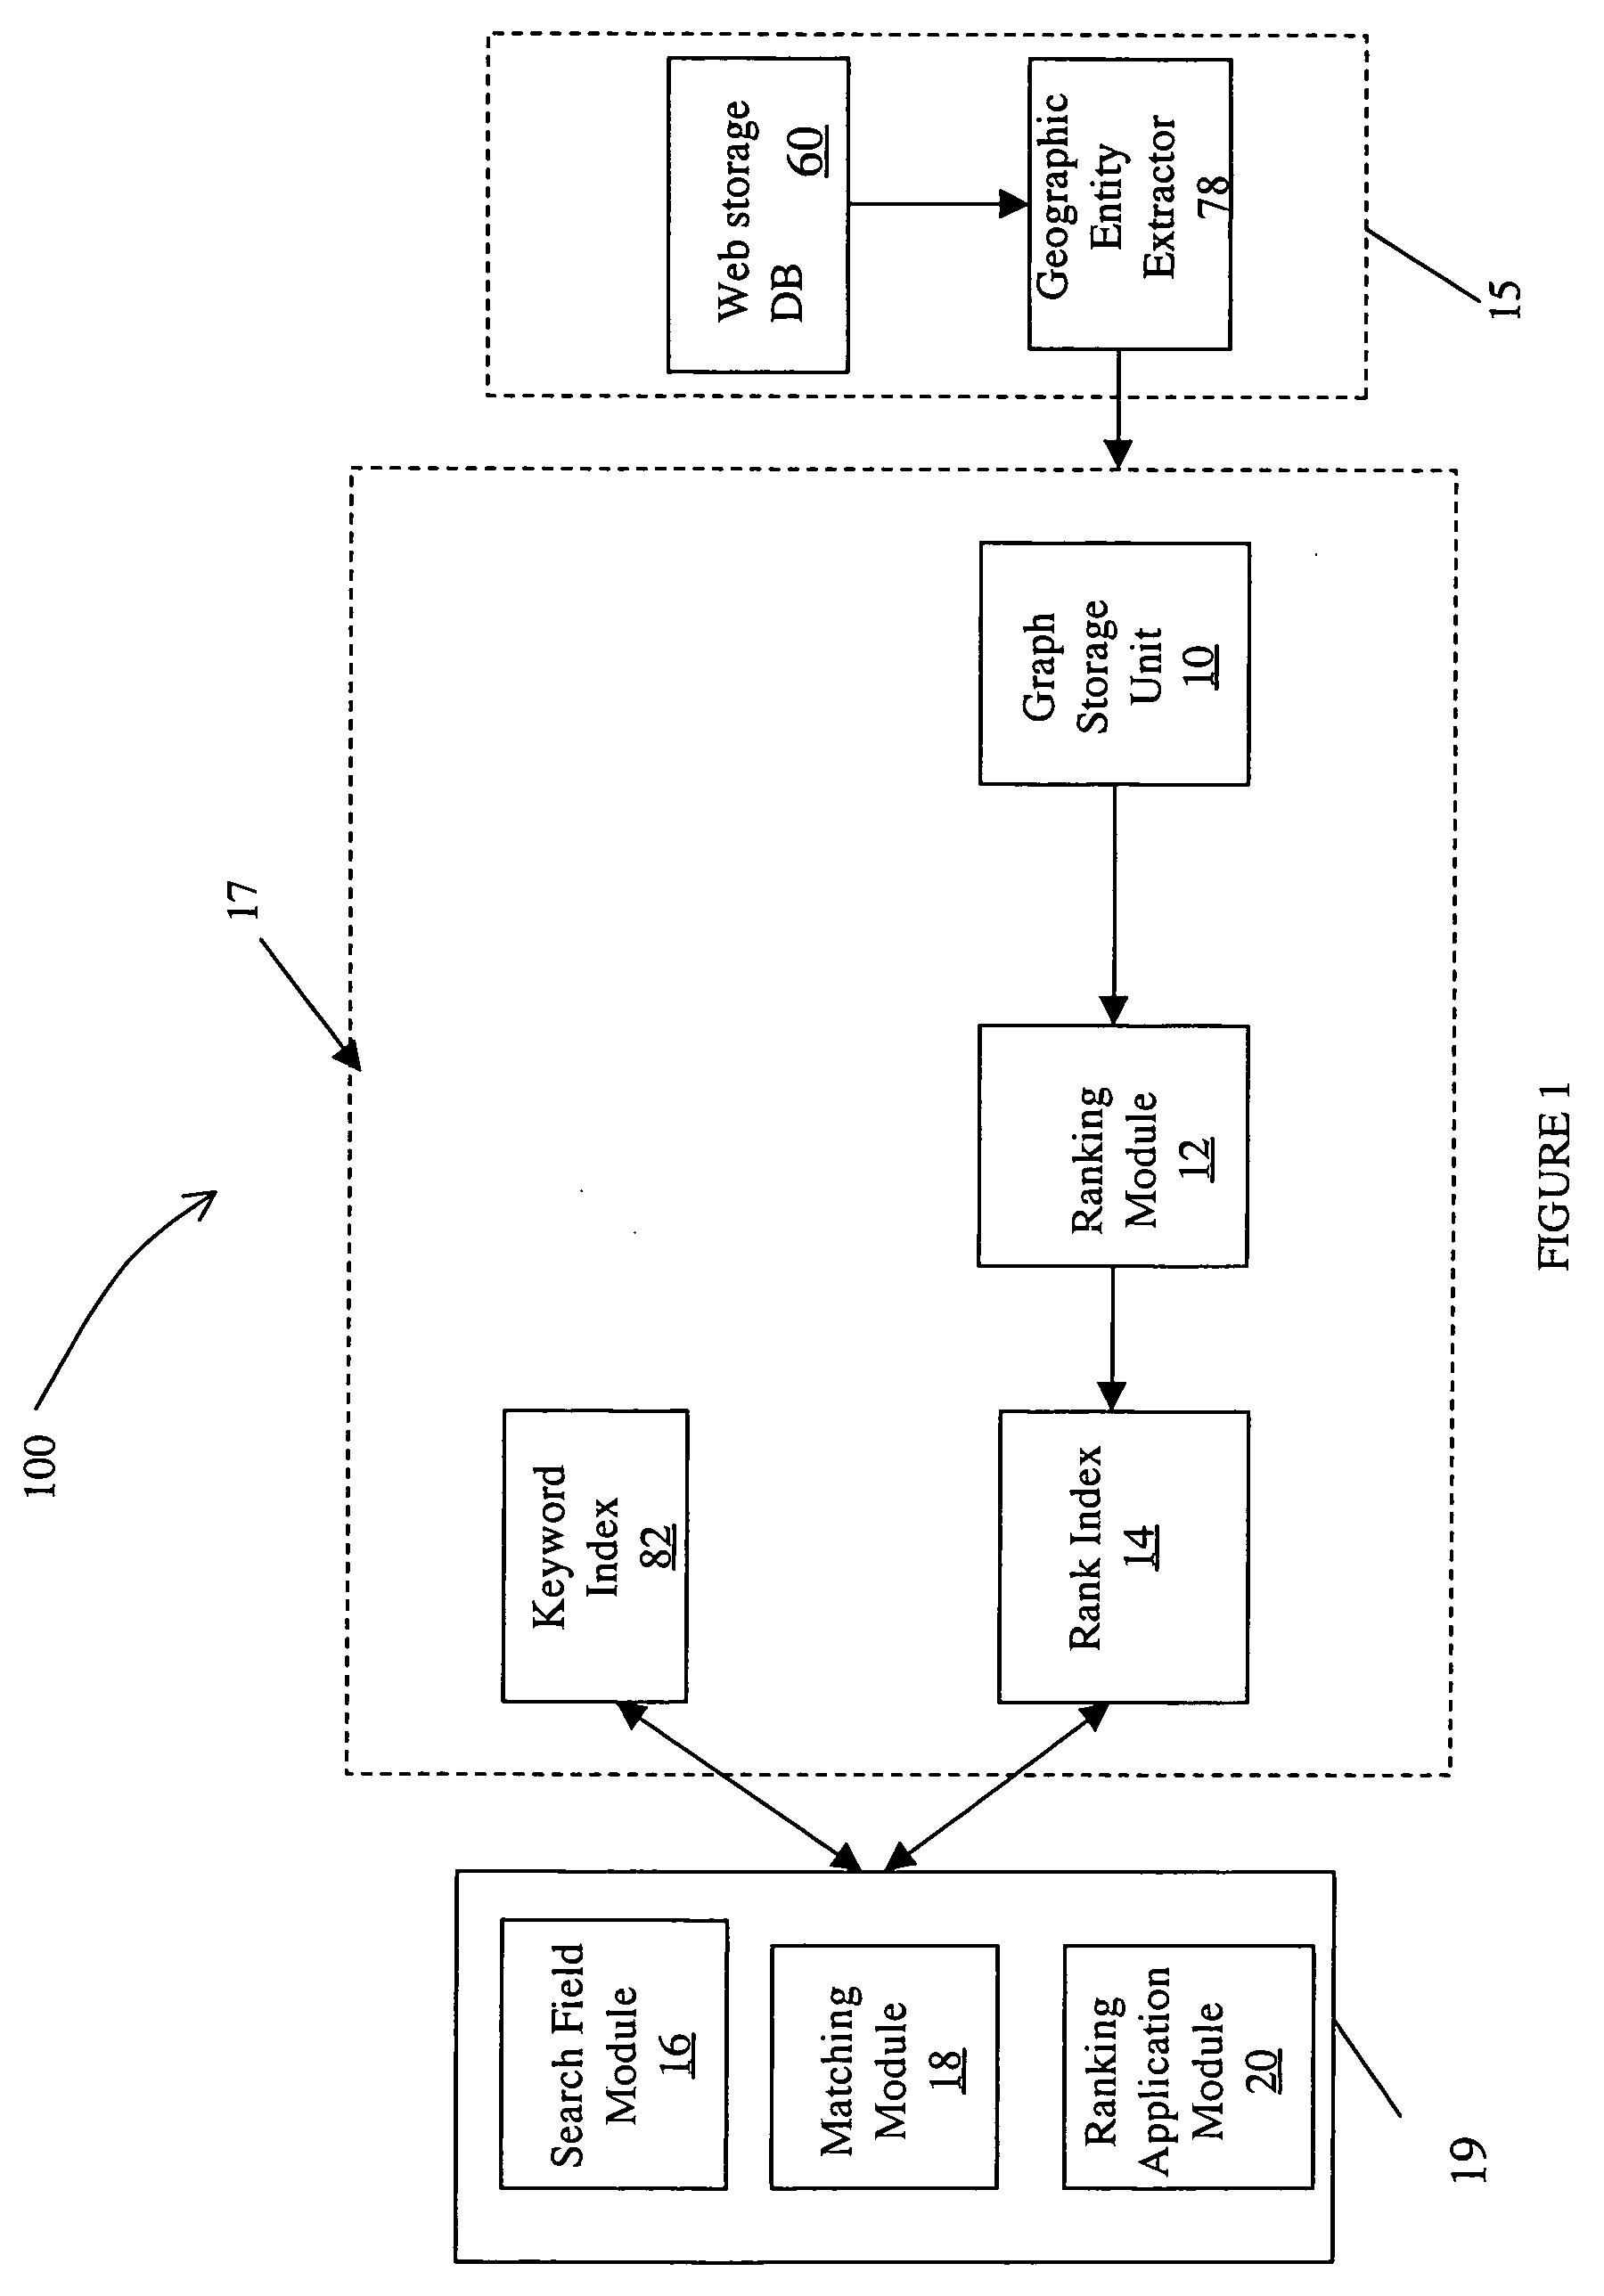 System and method for ranking web content